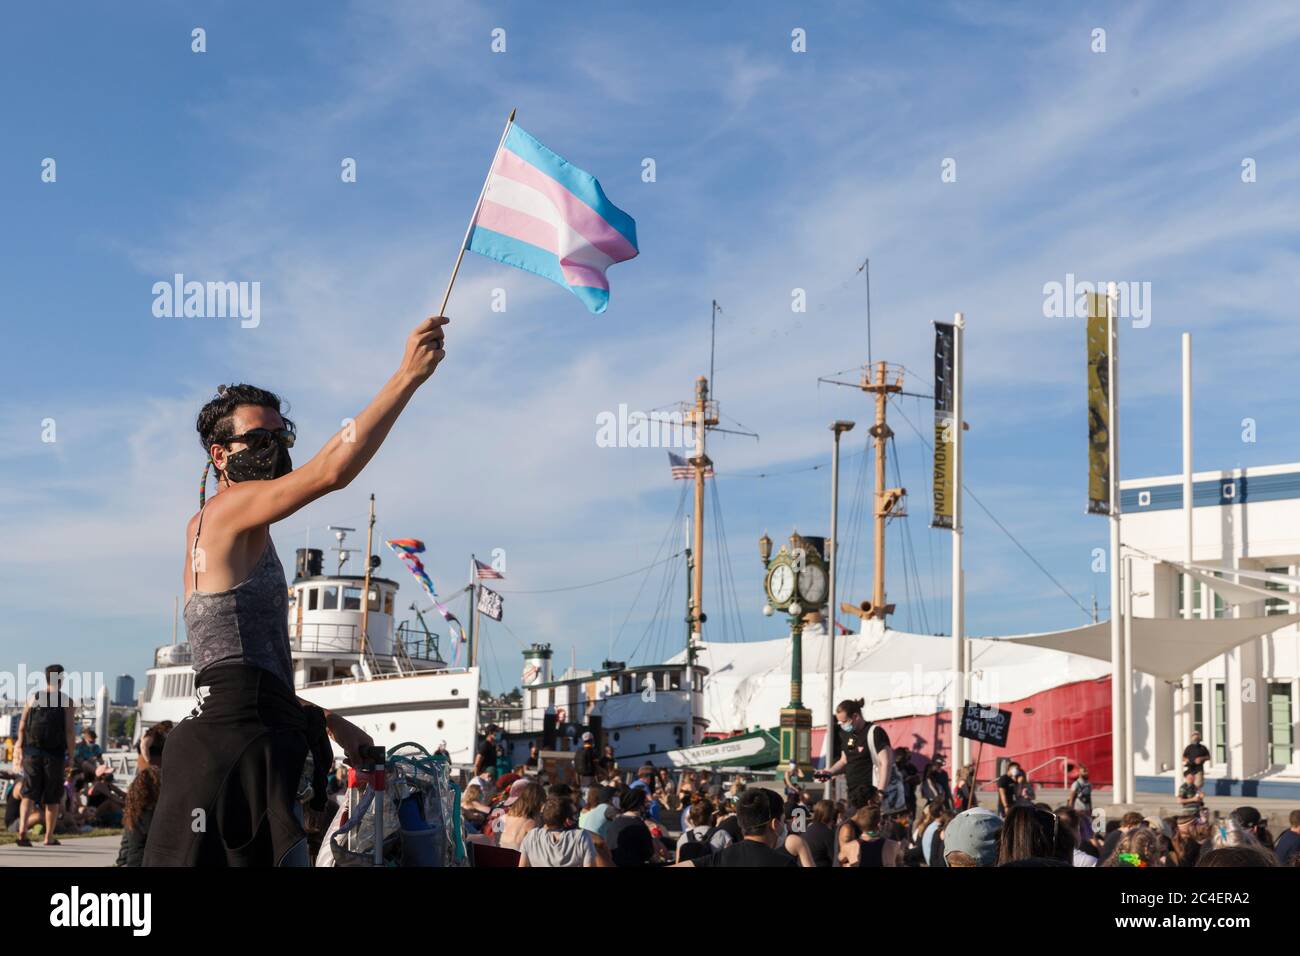 A supporter waves a transgender pride flag at the Museum of History & Industry during the All Black Lives Matter March, on South Lake Union in Seattle on Thursday, June 25, 2020. The march was held in support of the Black LGBTQ+ community and in solidarity for the murders of Riah Milton and Dominique Rem’mie and other black trans women. Stock Photo